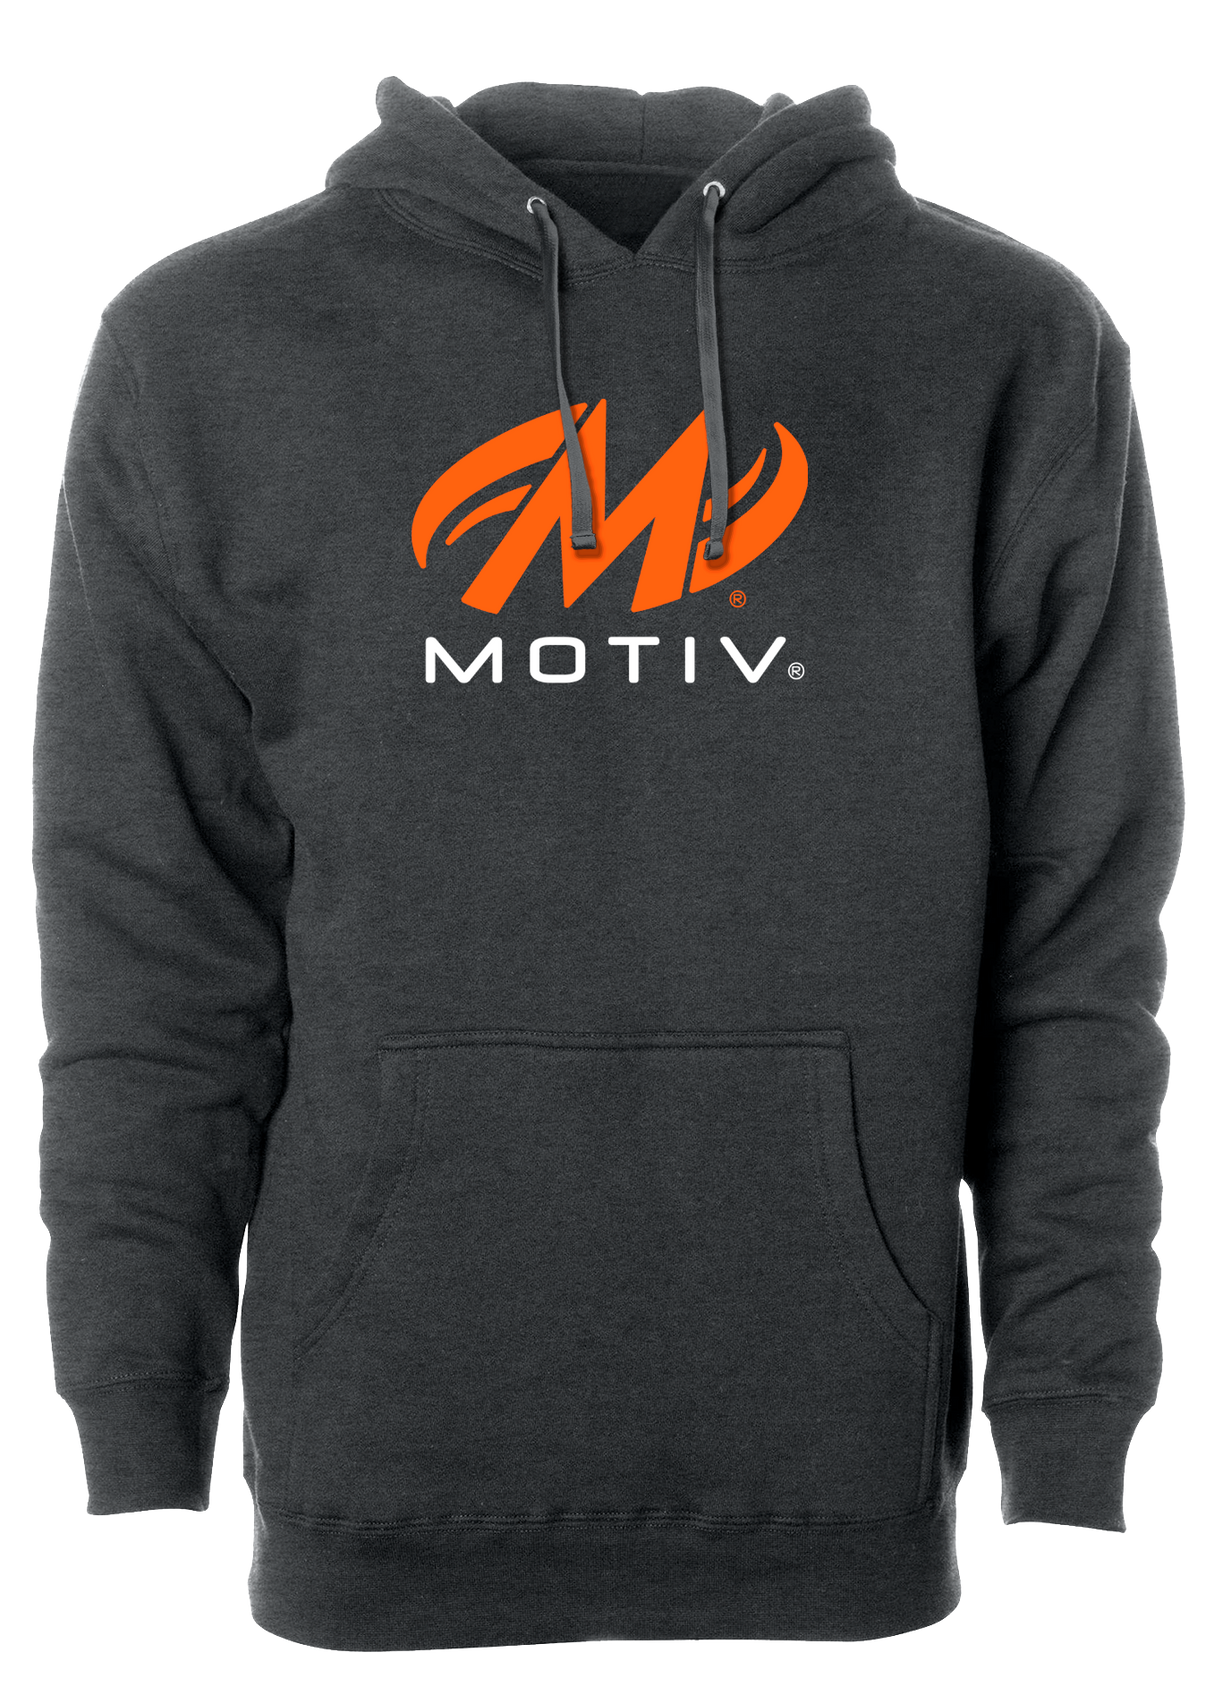 Keep warm in this stylish Motiv Classic Logo design hooded sweatshirt. 60/40 cotton/polyester blend material Standard Fit  Front pouch pocket Midweight Hoodie/Hooded Sweatshirt. Motiv bowling hoodie hooded sweatshirt motivated team shirt comfortable clothing amazon ebay walmart special gift christmas review pullover